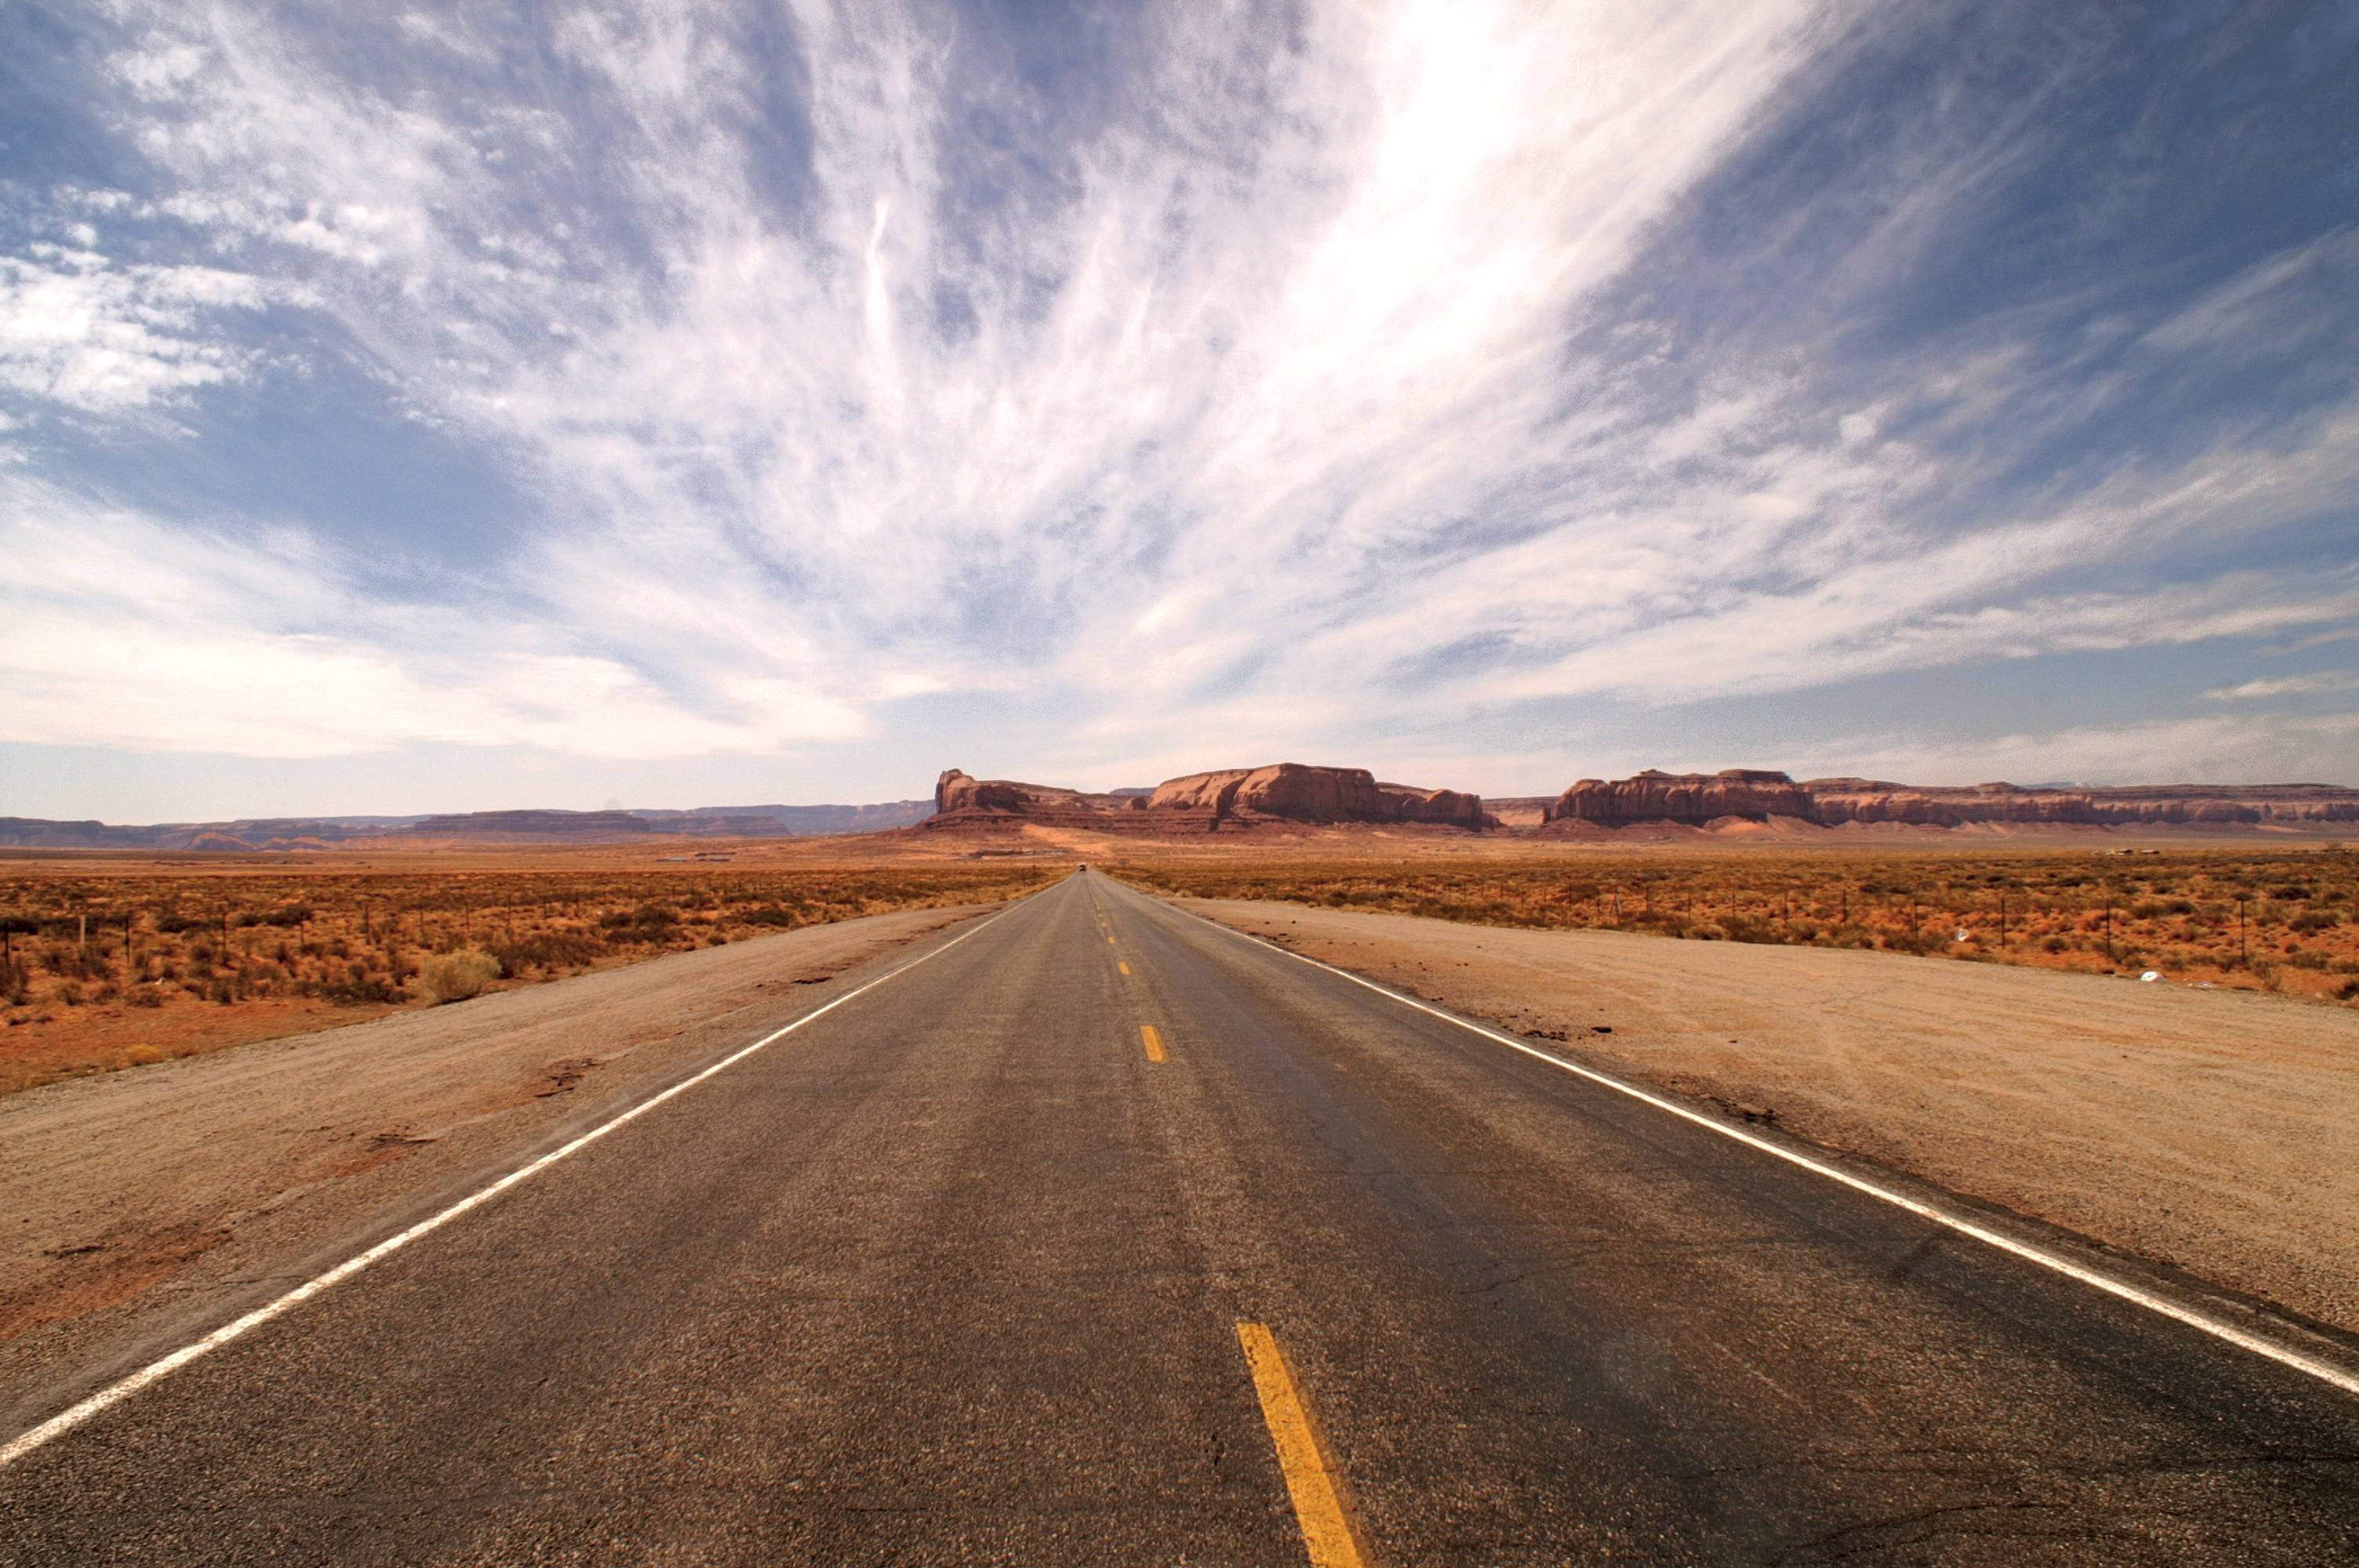 asphalt road in the middle of the desert under white clouds and blue sky during daytime